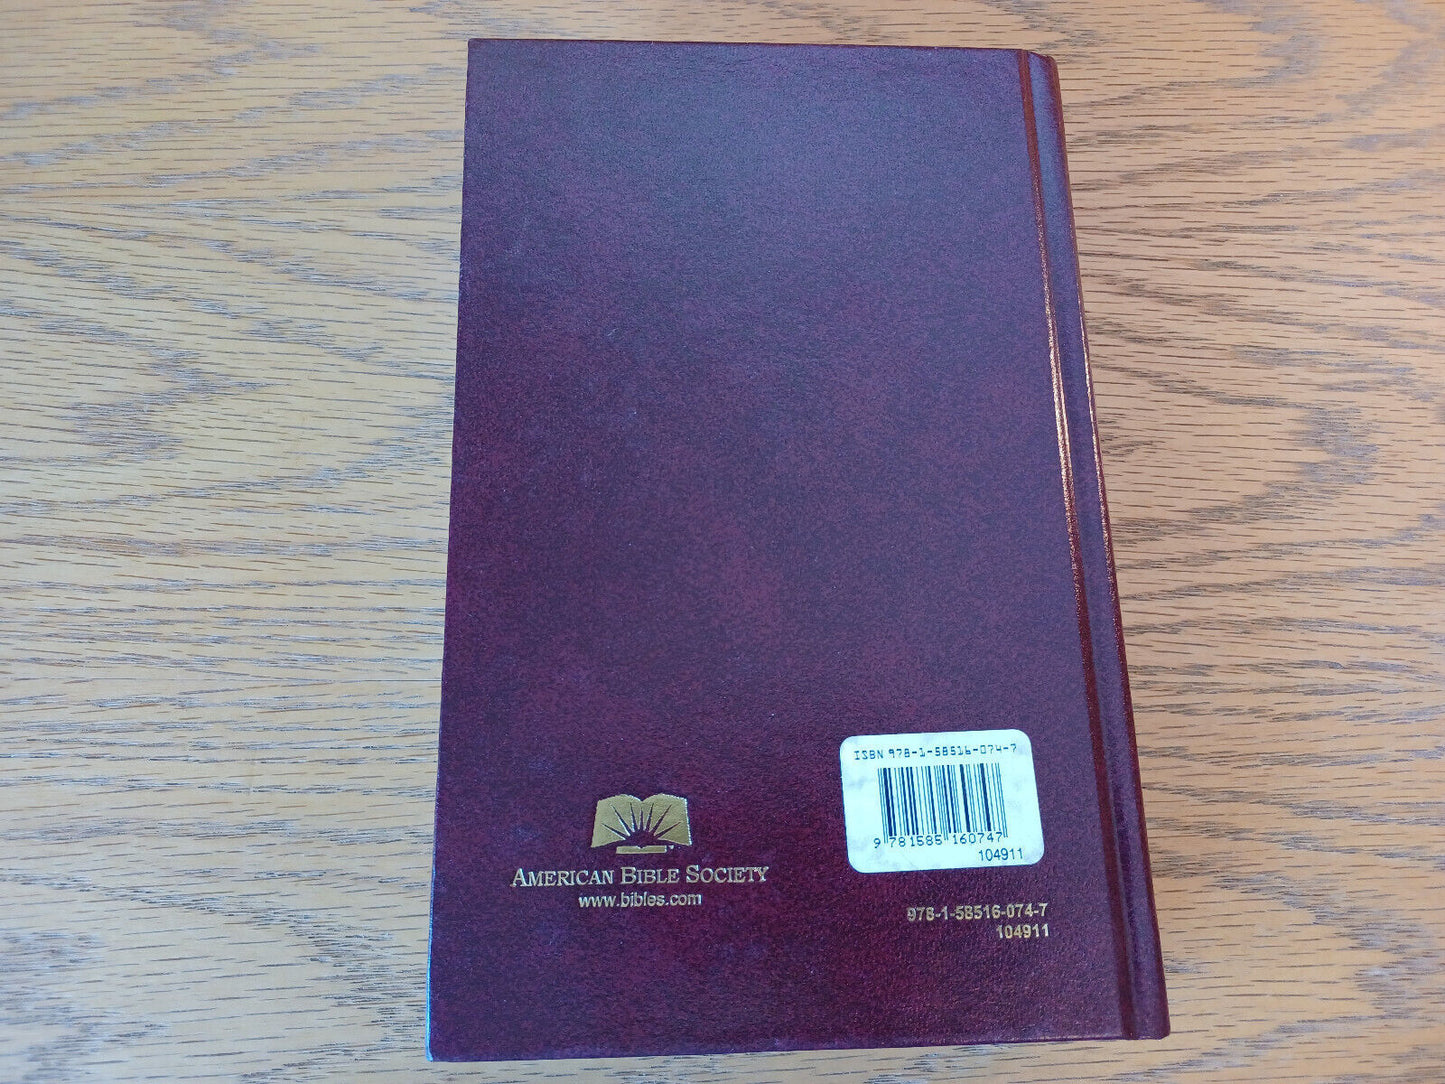 Holy Bible New Revised Standard Version American Bible Society Hardcover C